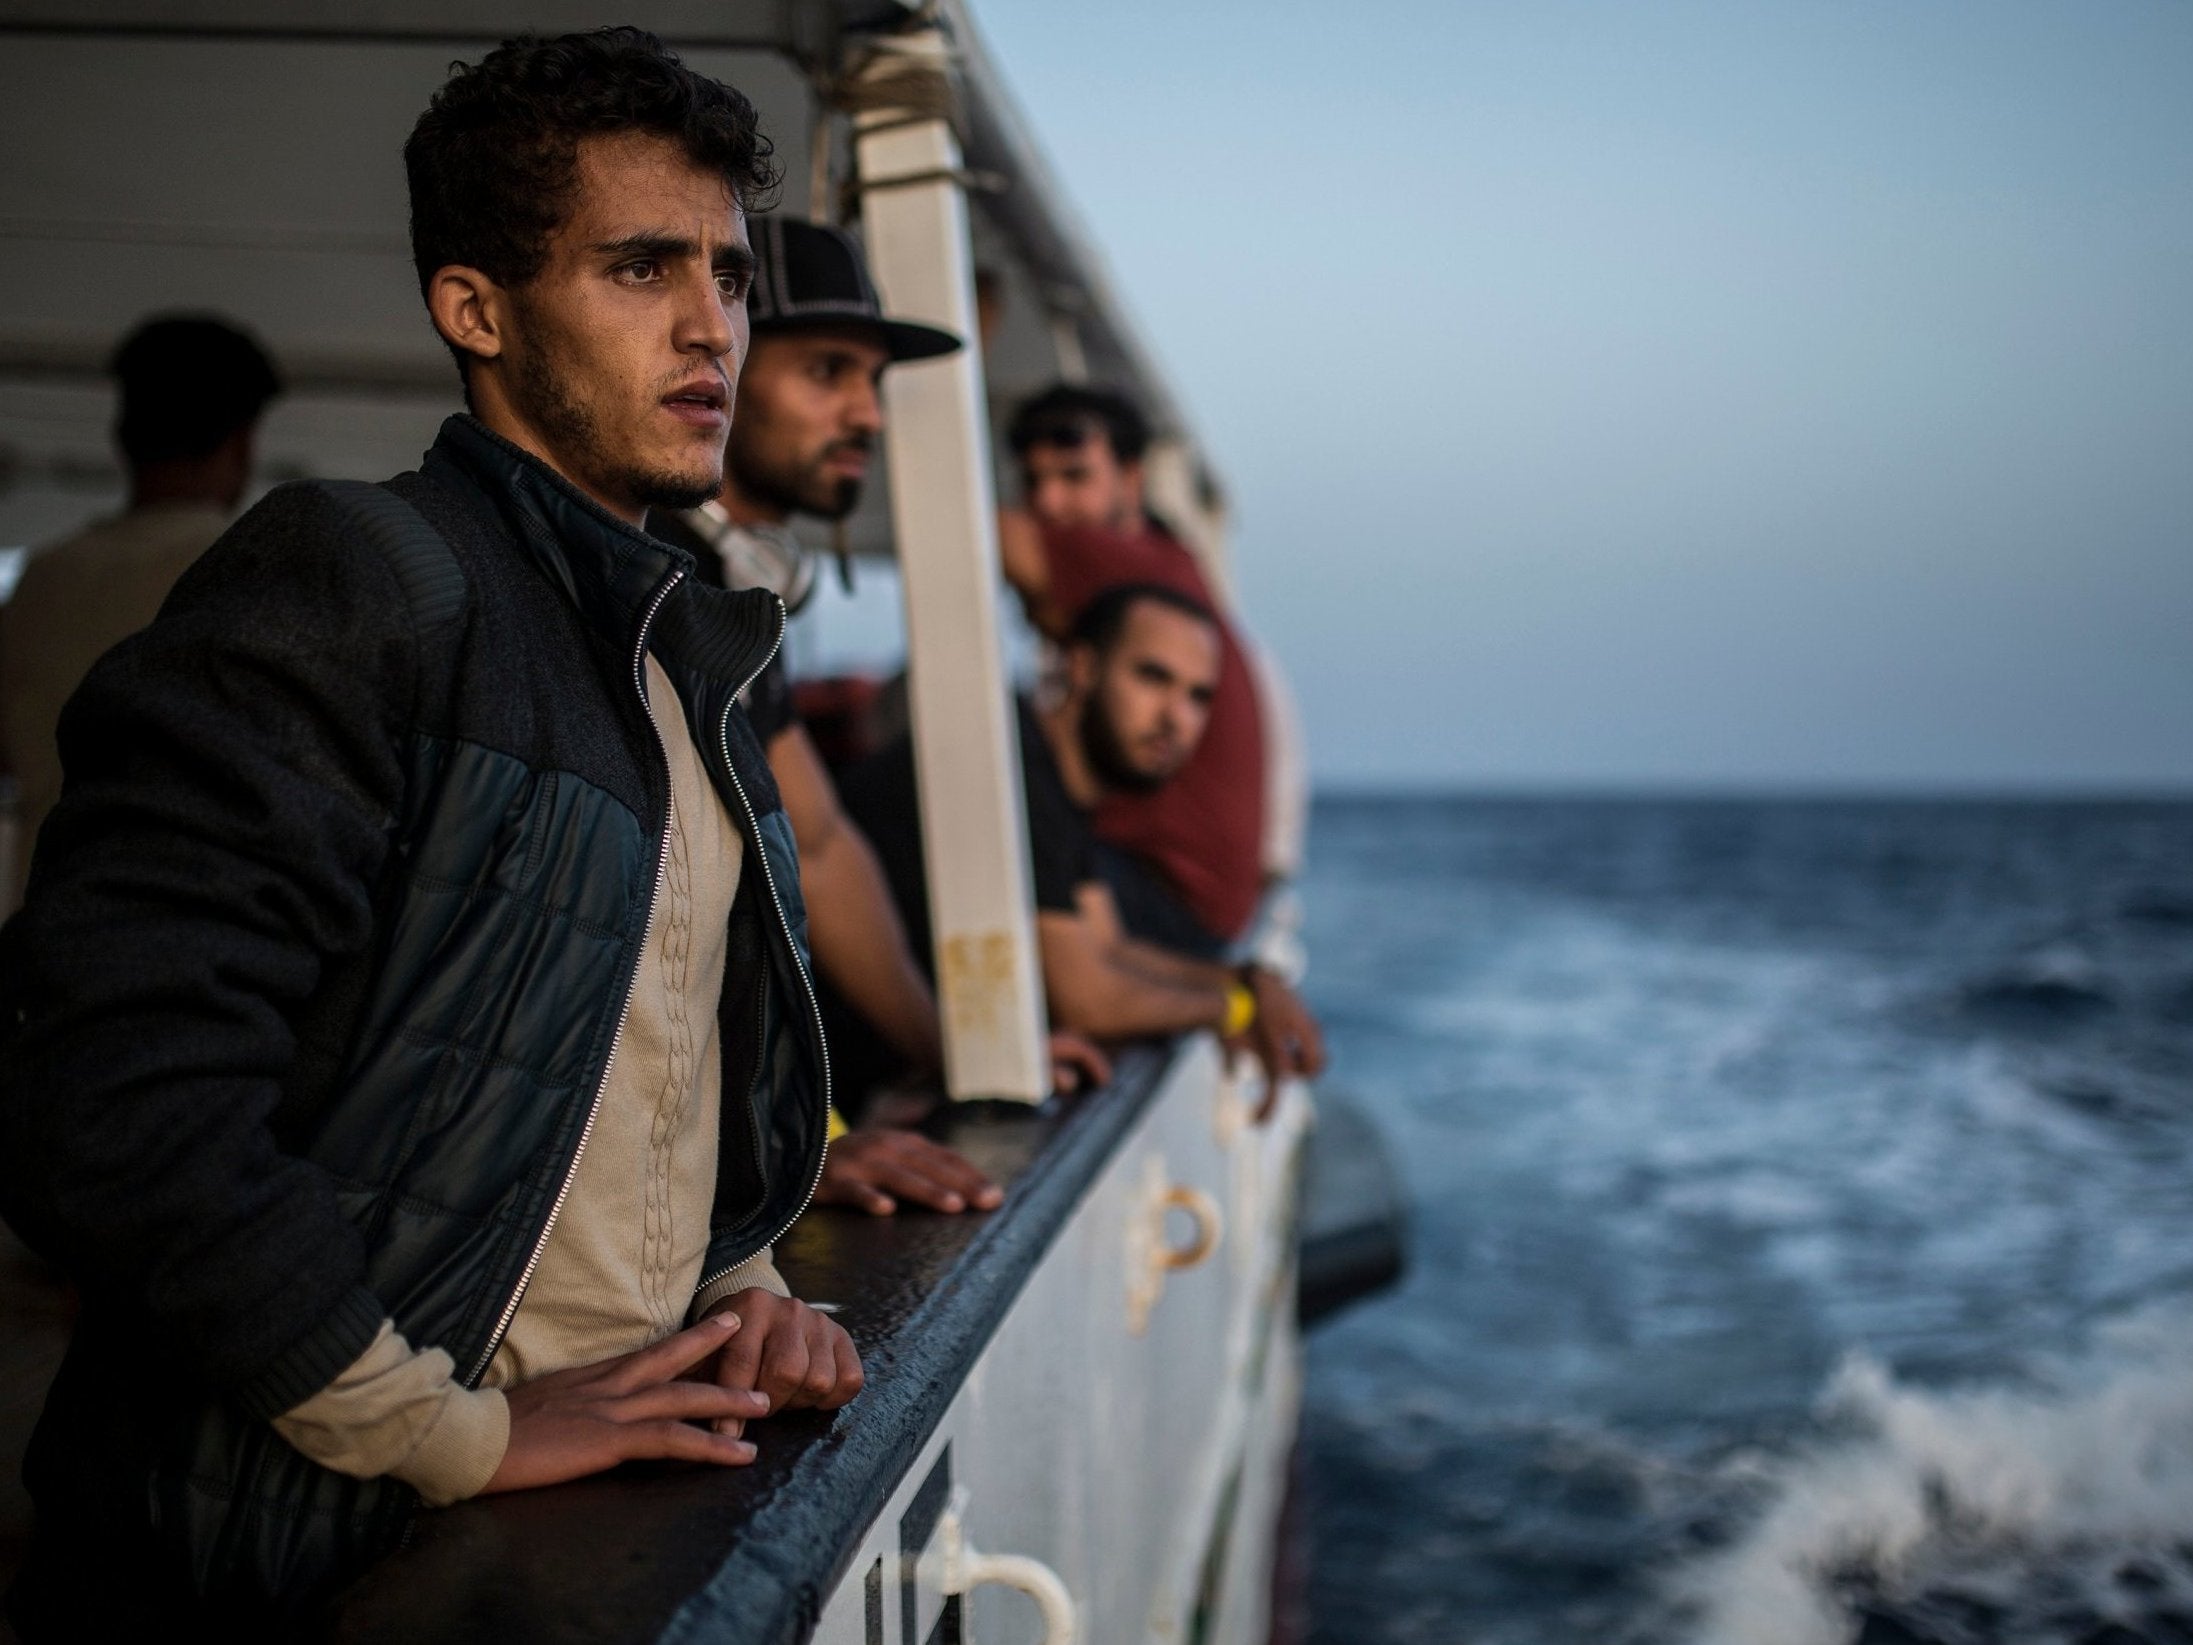 More than 33,000 migrants have died at sea trying to reach European shores since 2000 (file image)